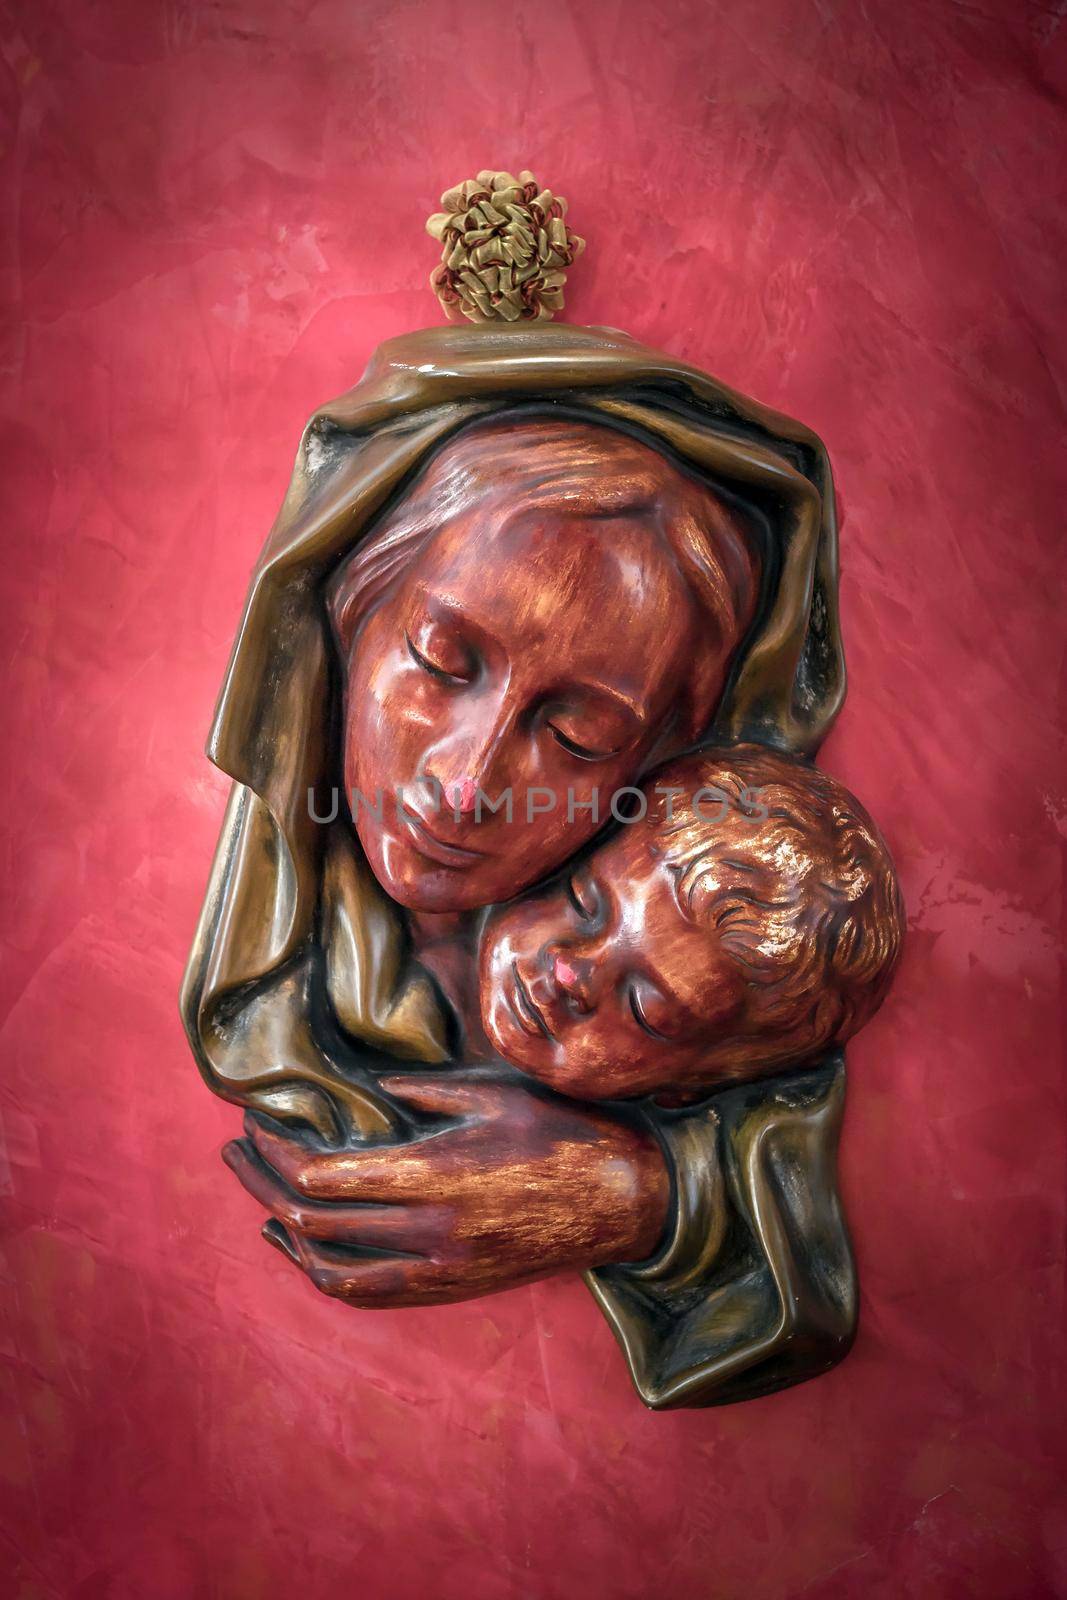 Red Bas relief madonna with child in embrace.